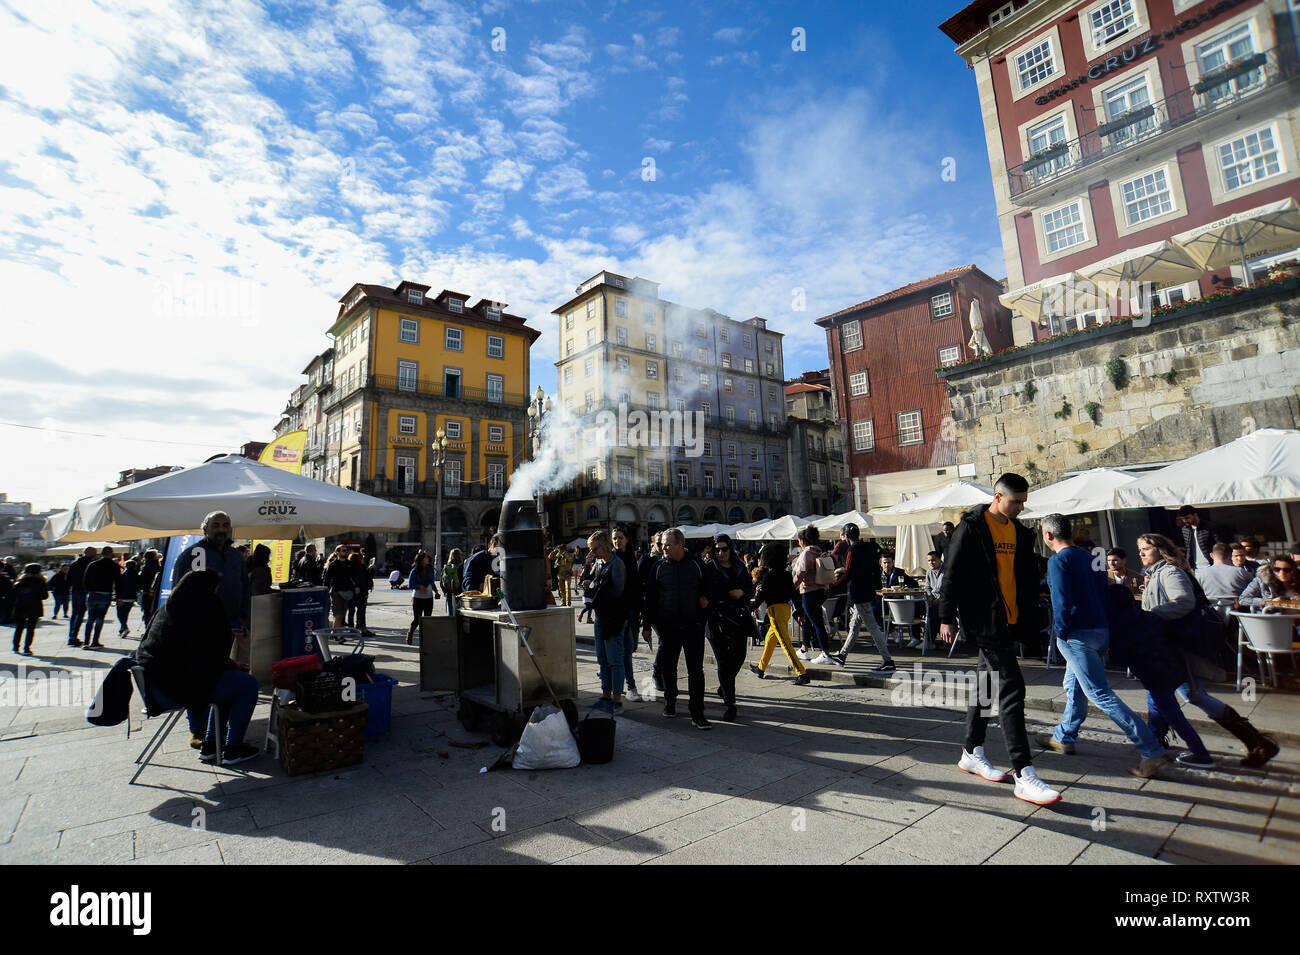 Tourists and locals seen walking with in the historical neighbourhood Ribeira. In 2018, Porto entered the list of the 100 most visited cities in the world in a ranking prepared by Euromonitor International. In 2018 it is estimated that the number of tourists reached 2.39 million. Stock Photo